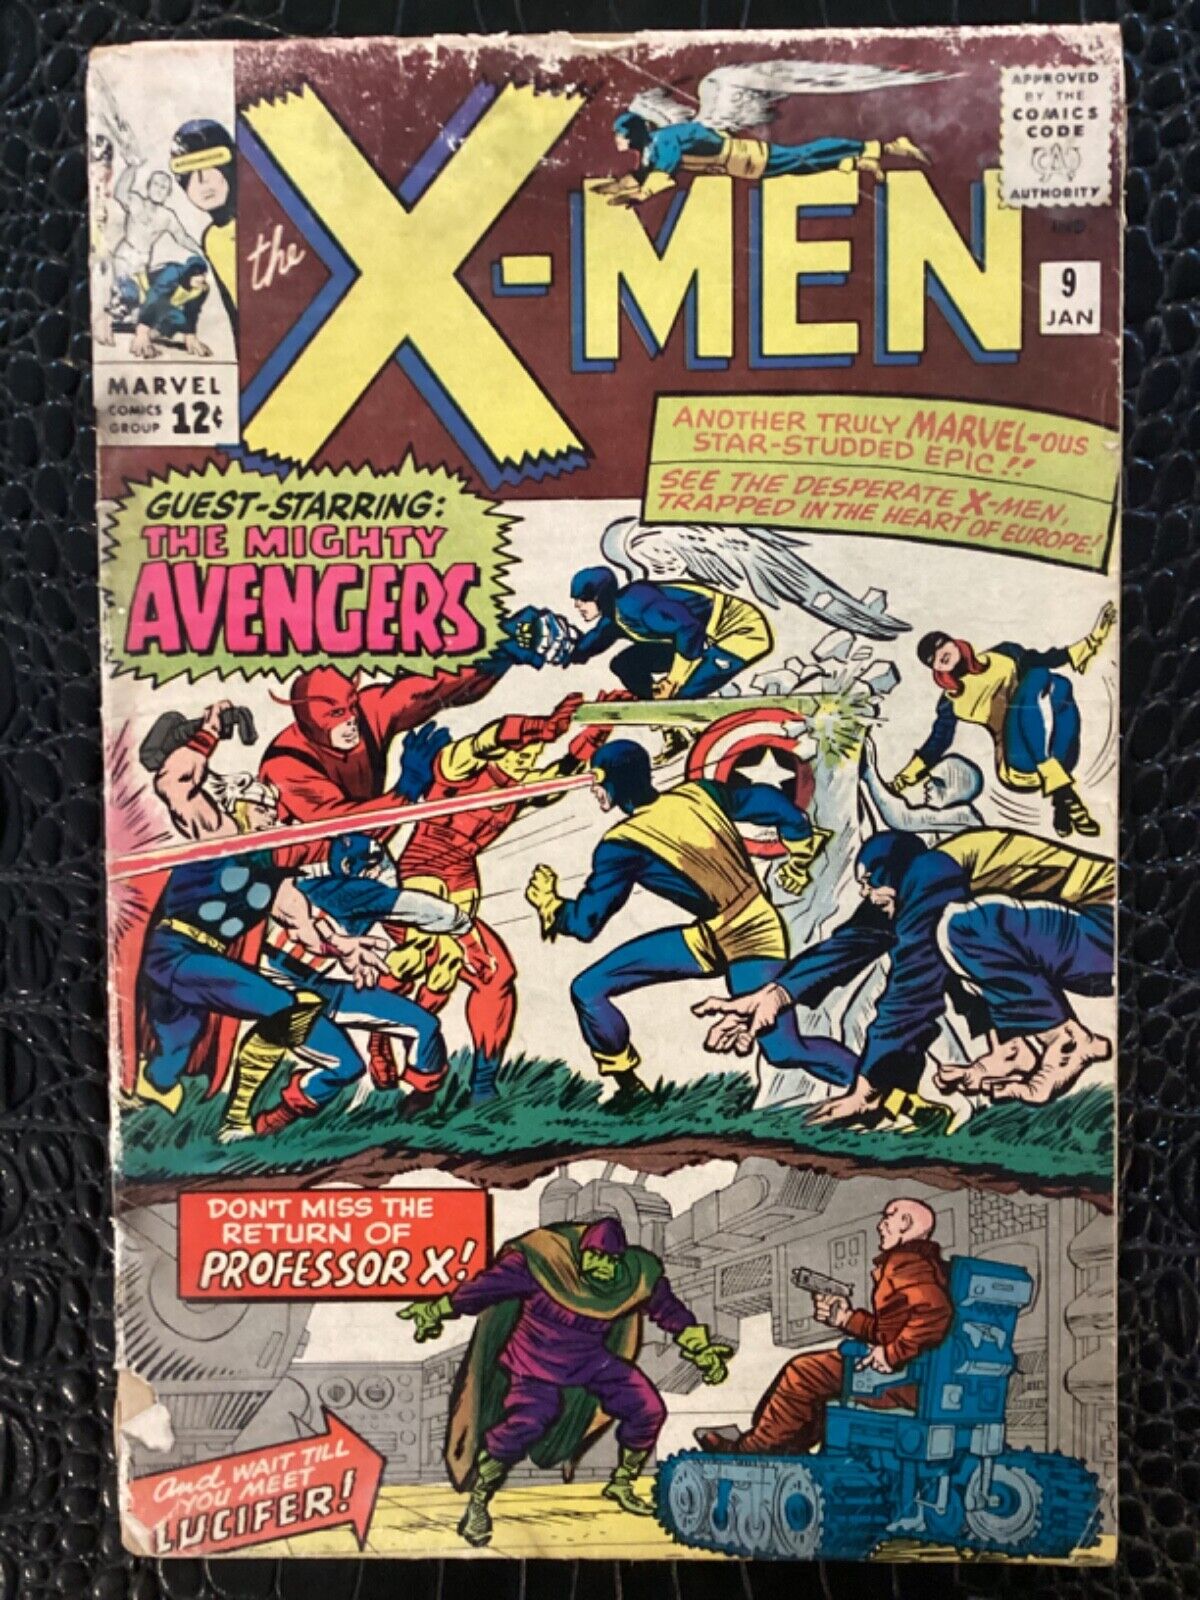 X-MEN #9 1965🔑First meeting of the Avengers and X-men 🔑 Stan Lee Jack Kirby